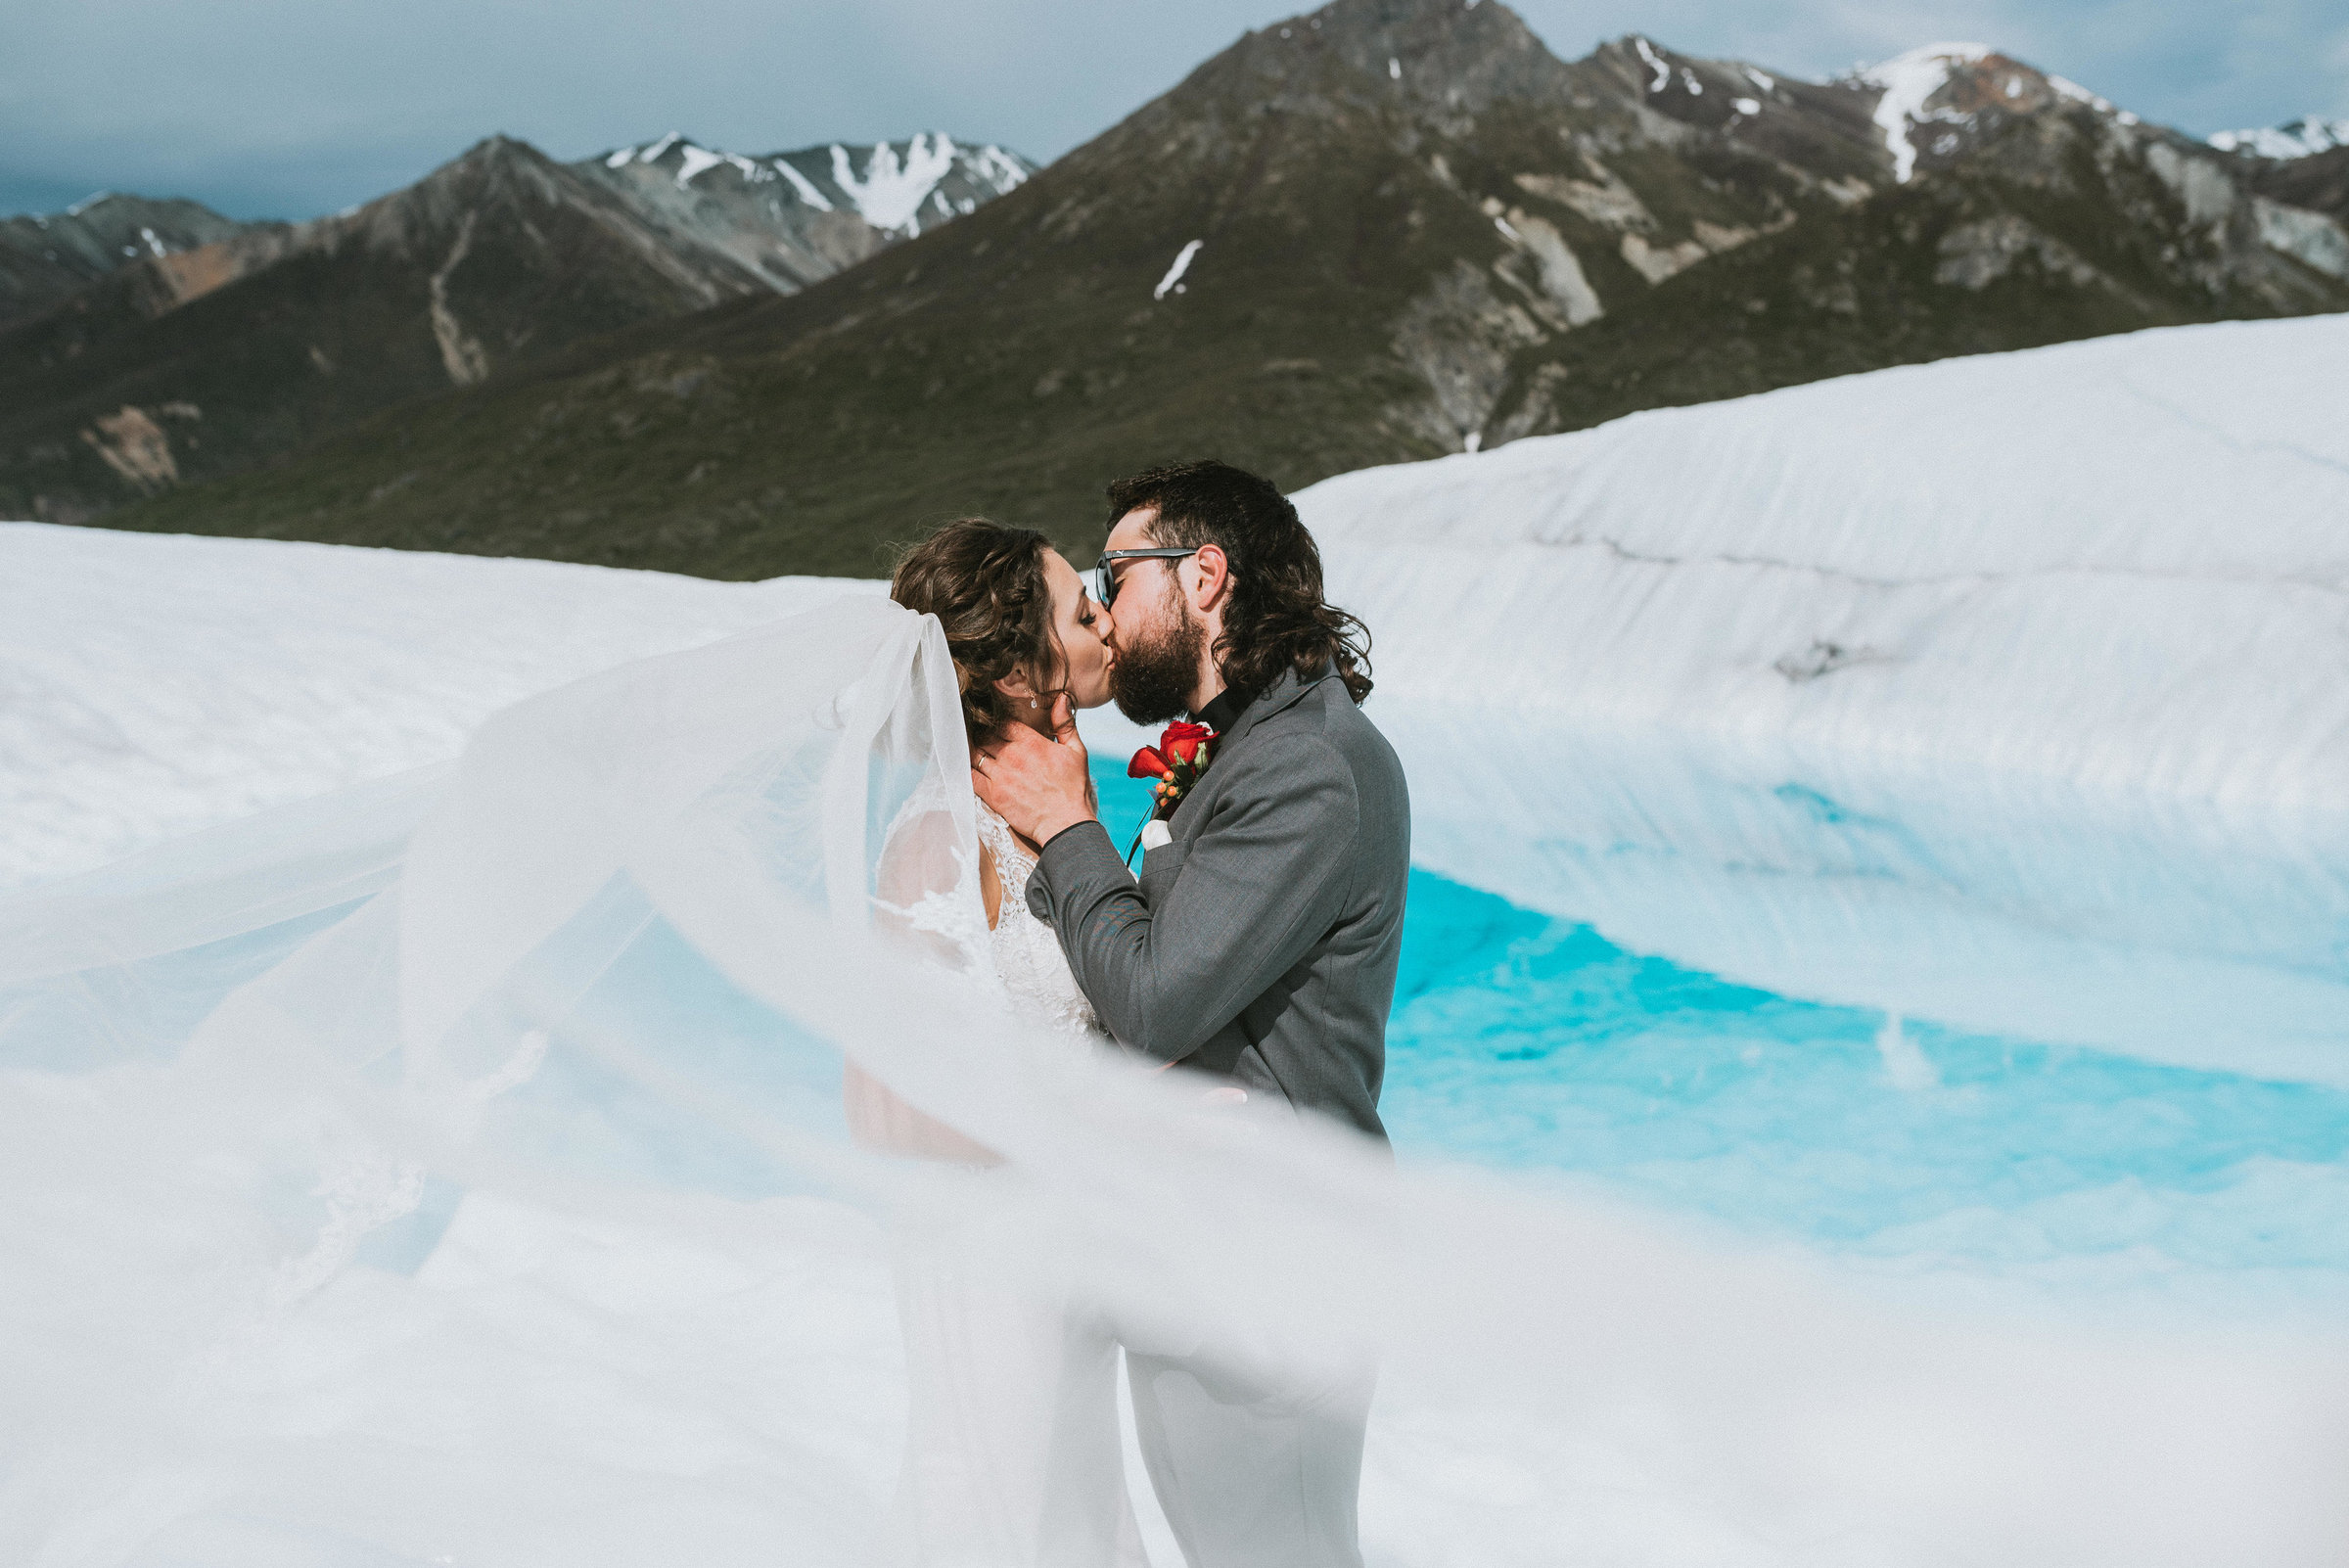 Newlyweds kissing in mountains